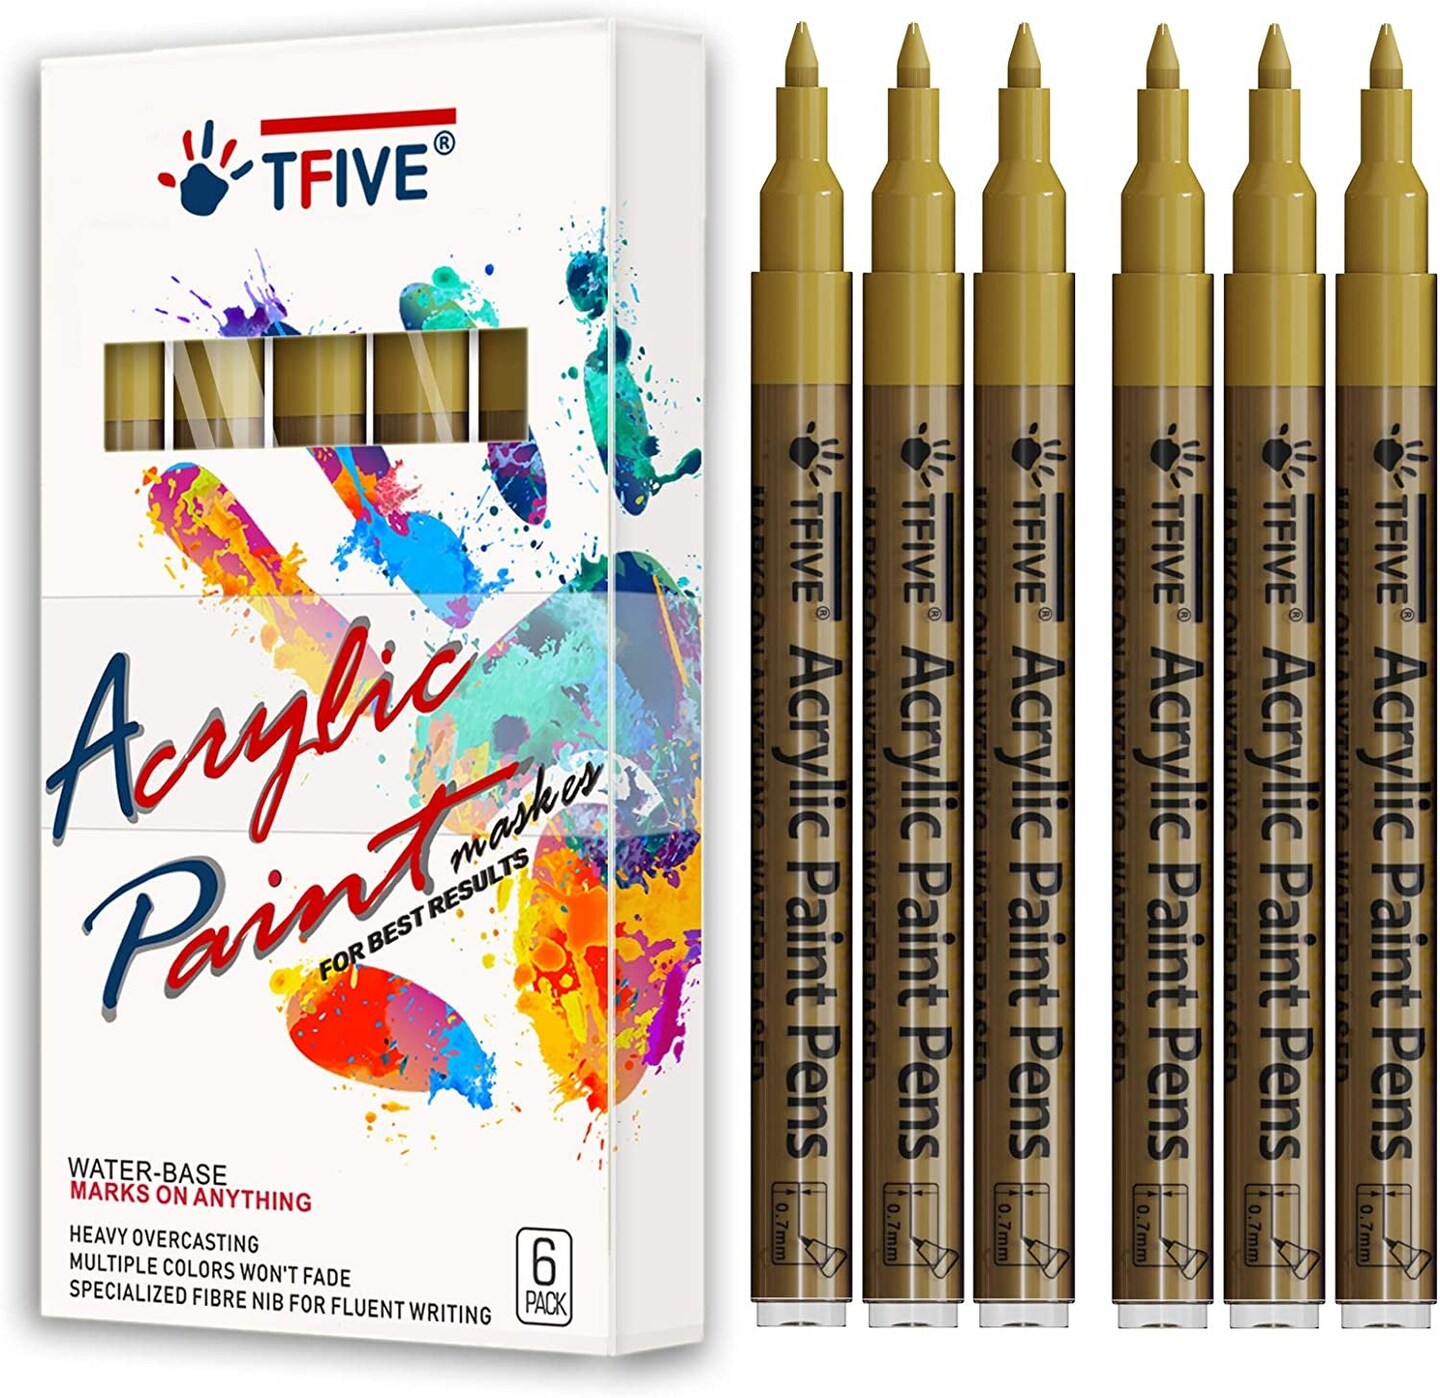 Acrylic Paint Pens Paint Markers, Fine Point Paint Pens for Rock Painting  Glass Wood Ceramic Fabric Metal Canvas, Drawing Art